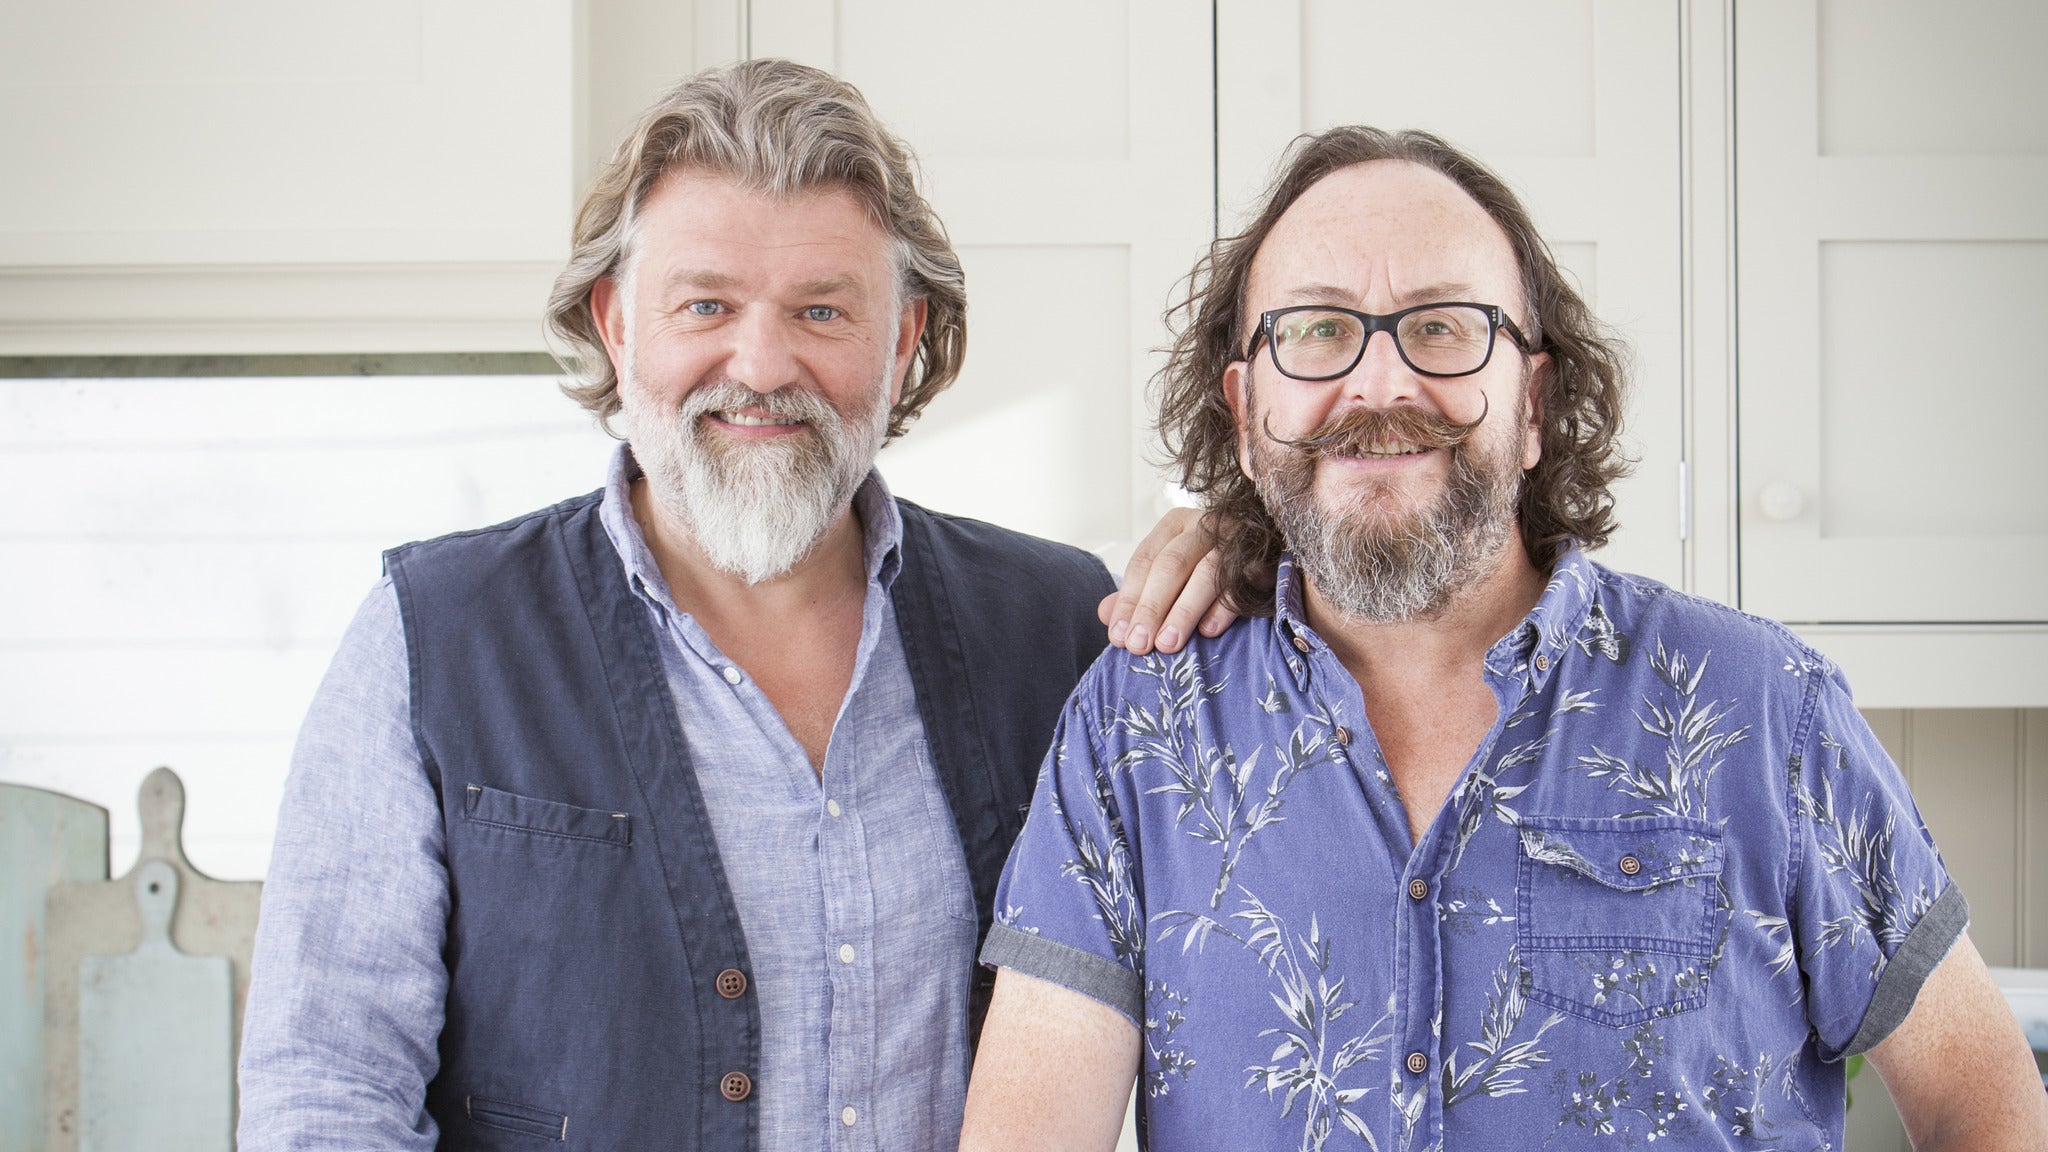 An Evening with the Hairy Bikers